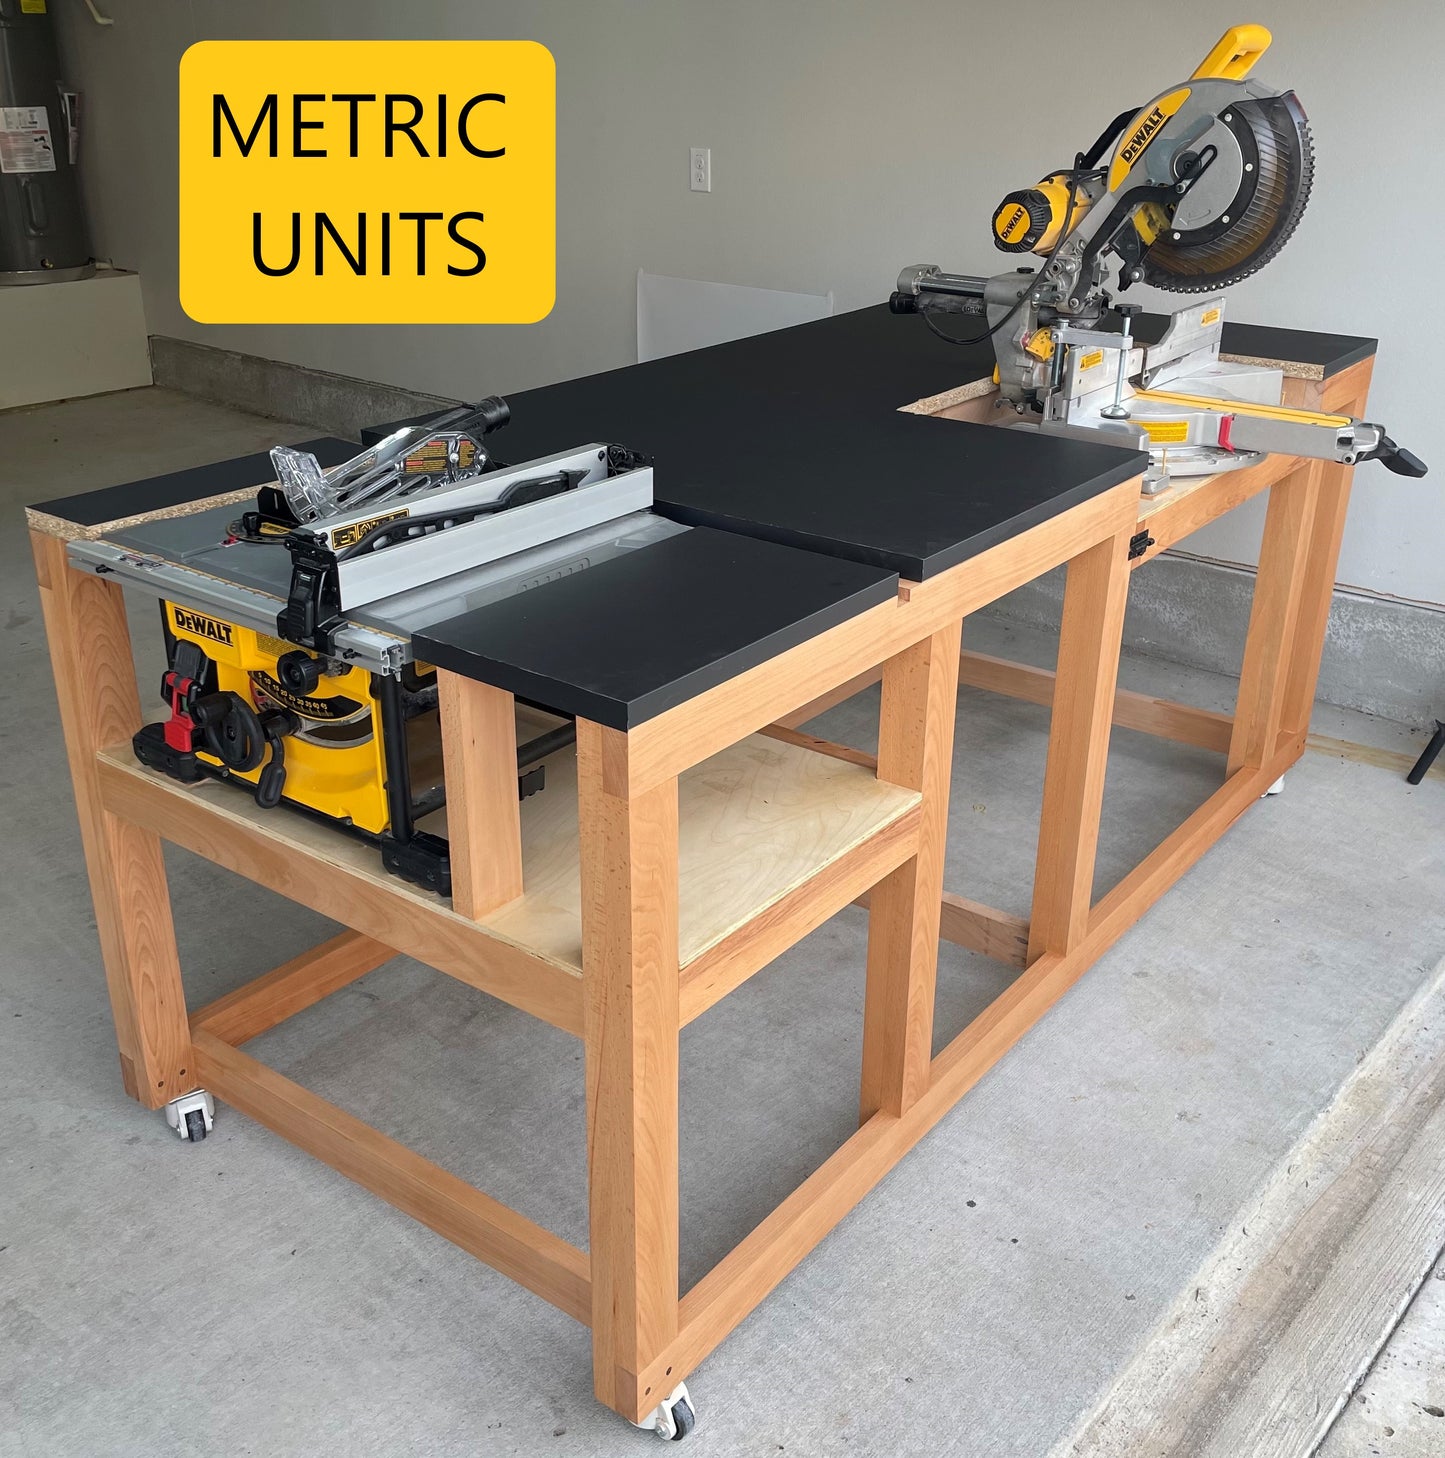 Mobile Miter / Table Saw Workbench Plans - Instant PDF Download - Metric Units